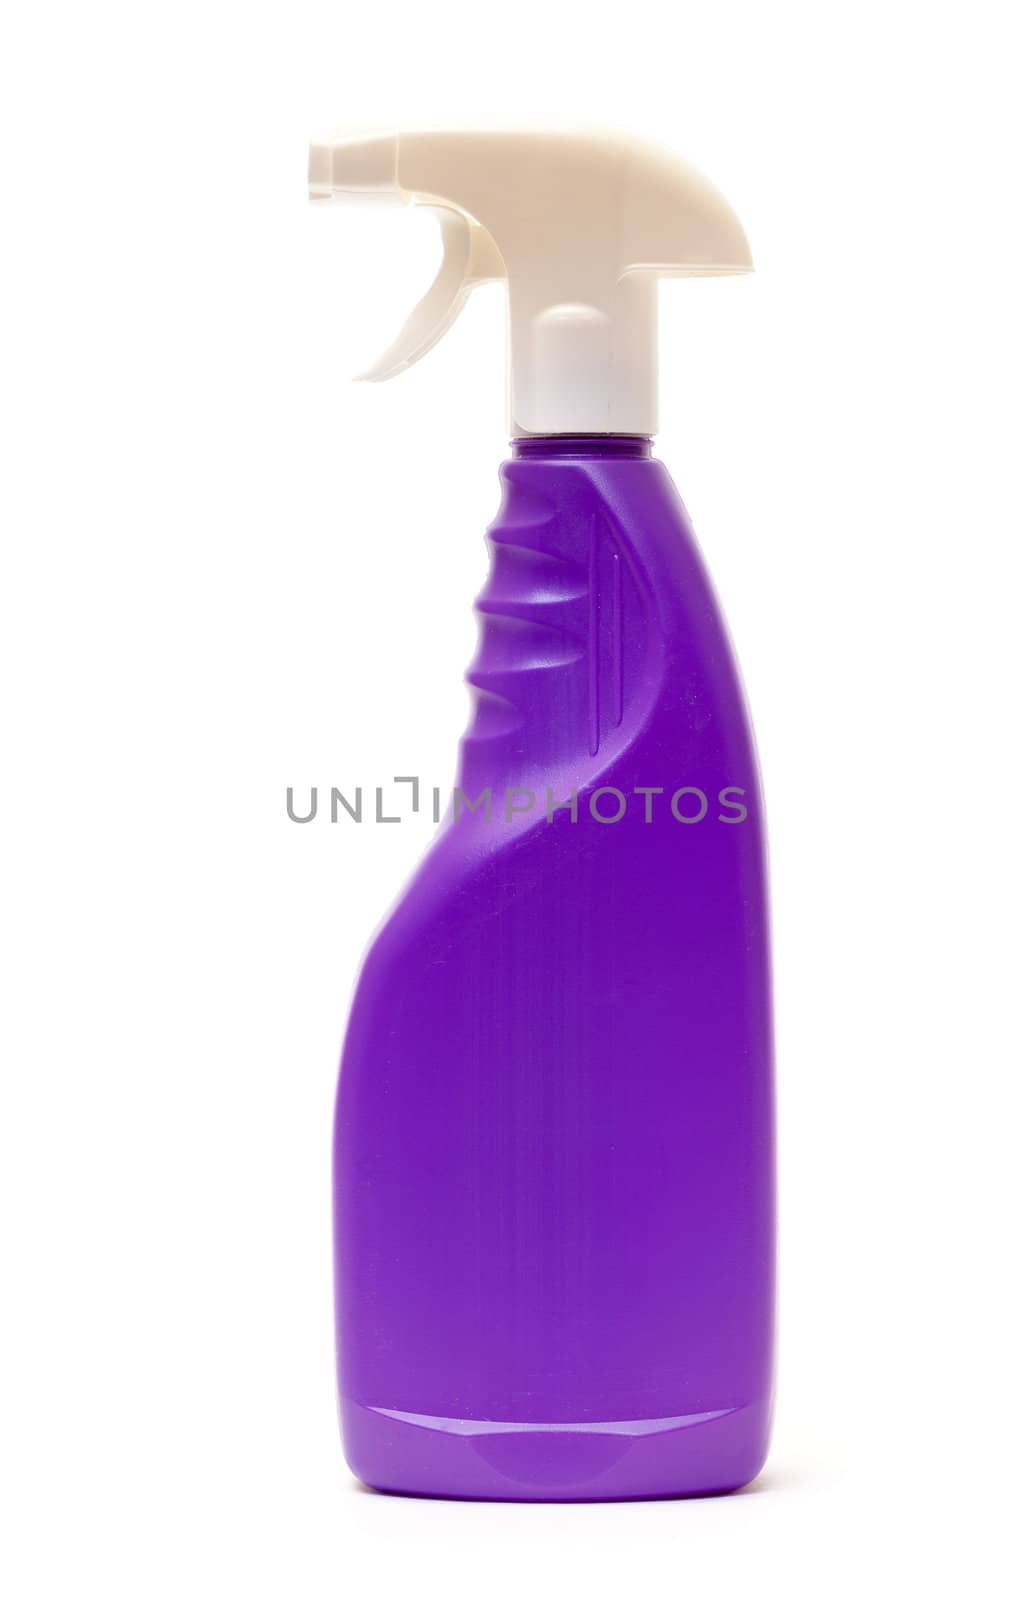 Detergent Spray Bottle by Discovod